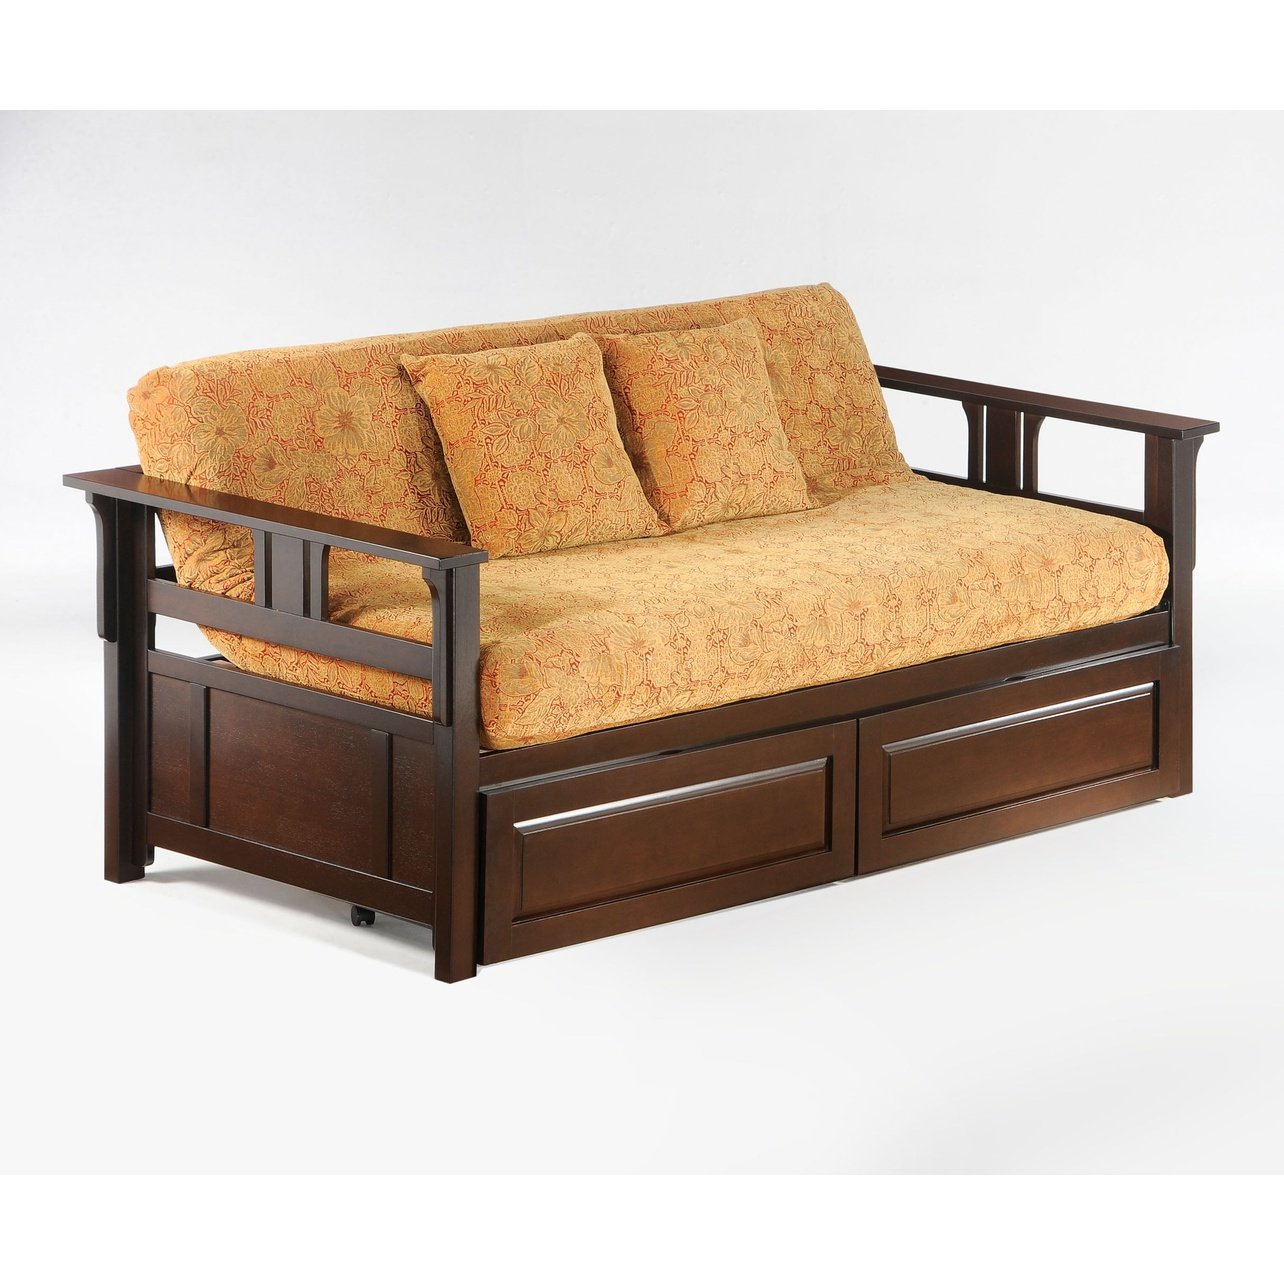 Night and Day Furniture Chocolate Teddy Roosevelt Daybed Complete - New Star Living